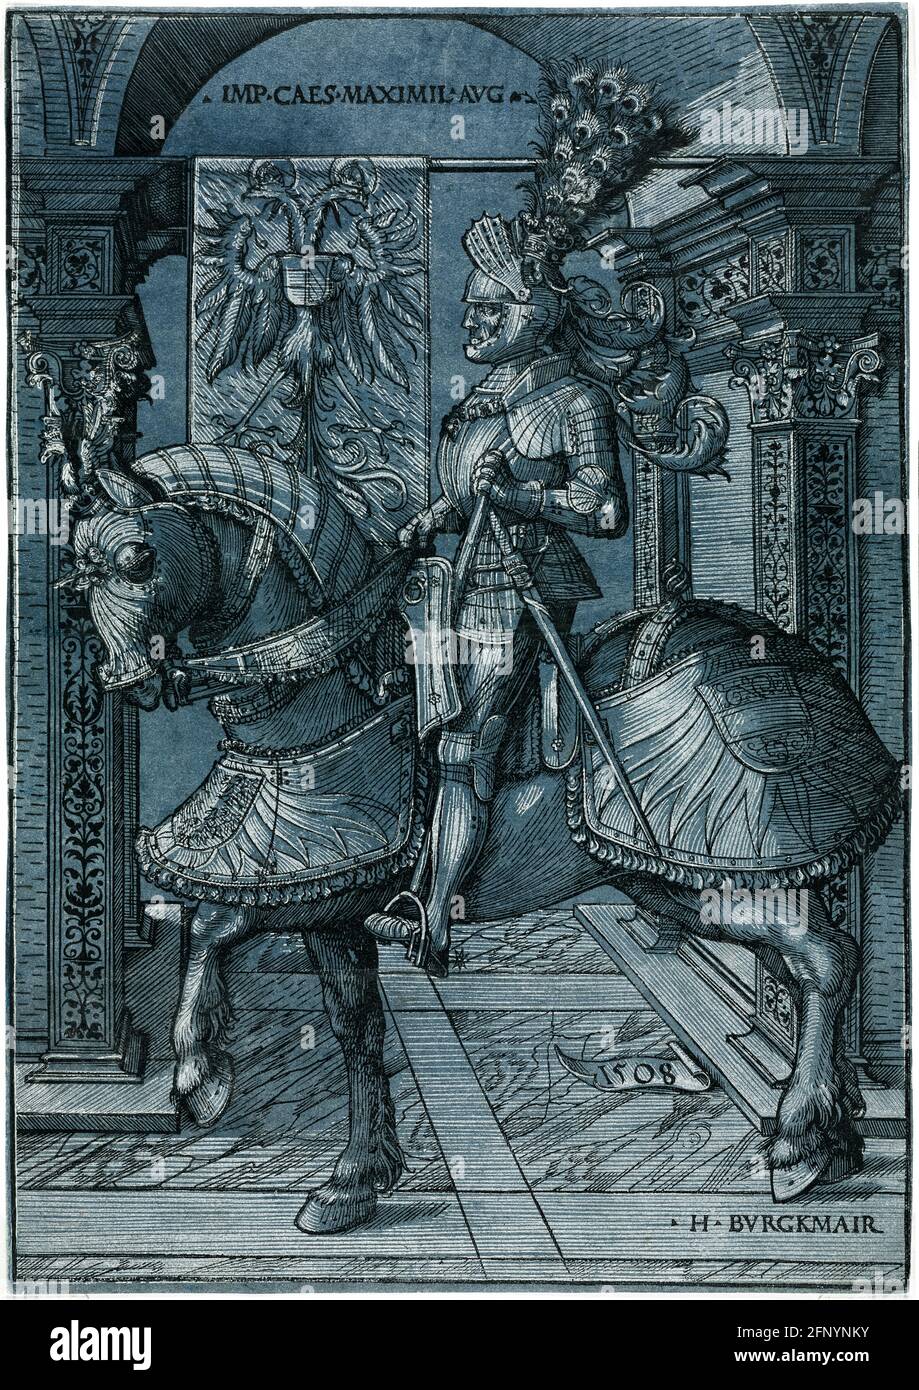 Maximilian I (1459-1519), Holy Roman Emperor 1508-1519, equestrian portrait in full armour by Hans Burgkmair the Elder, woodcut print, 1508 Stock Photo